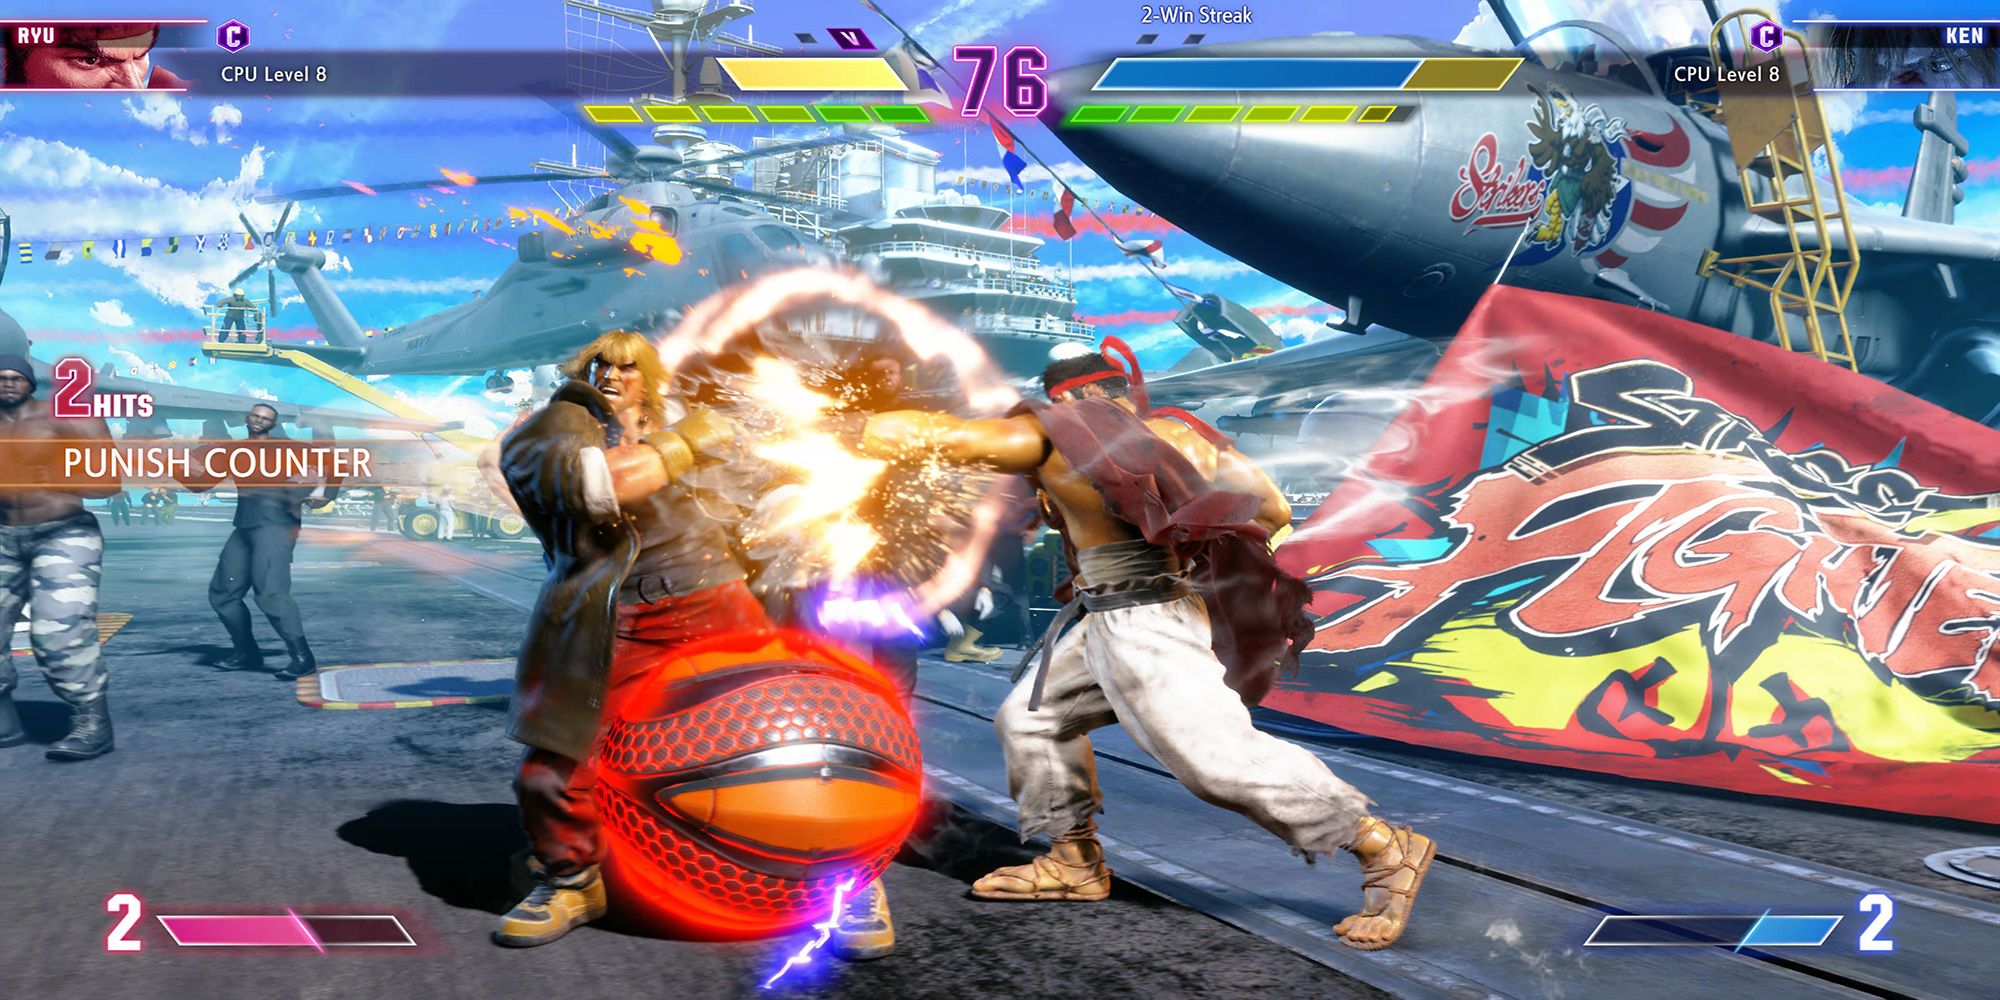 Ryu punches Ken in the face, while a bomb between gets ready to explode, during an Extreme Battle at Carrier Byron Taylor in Street Fighter 6.